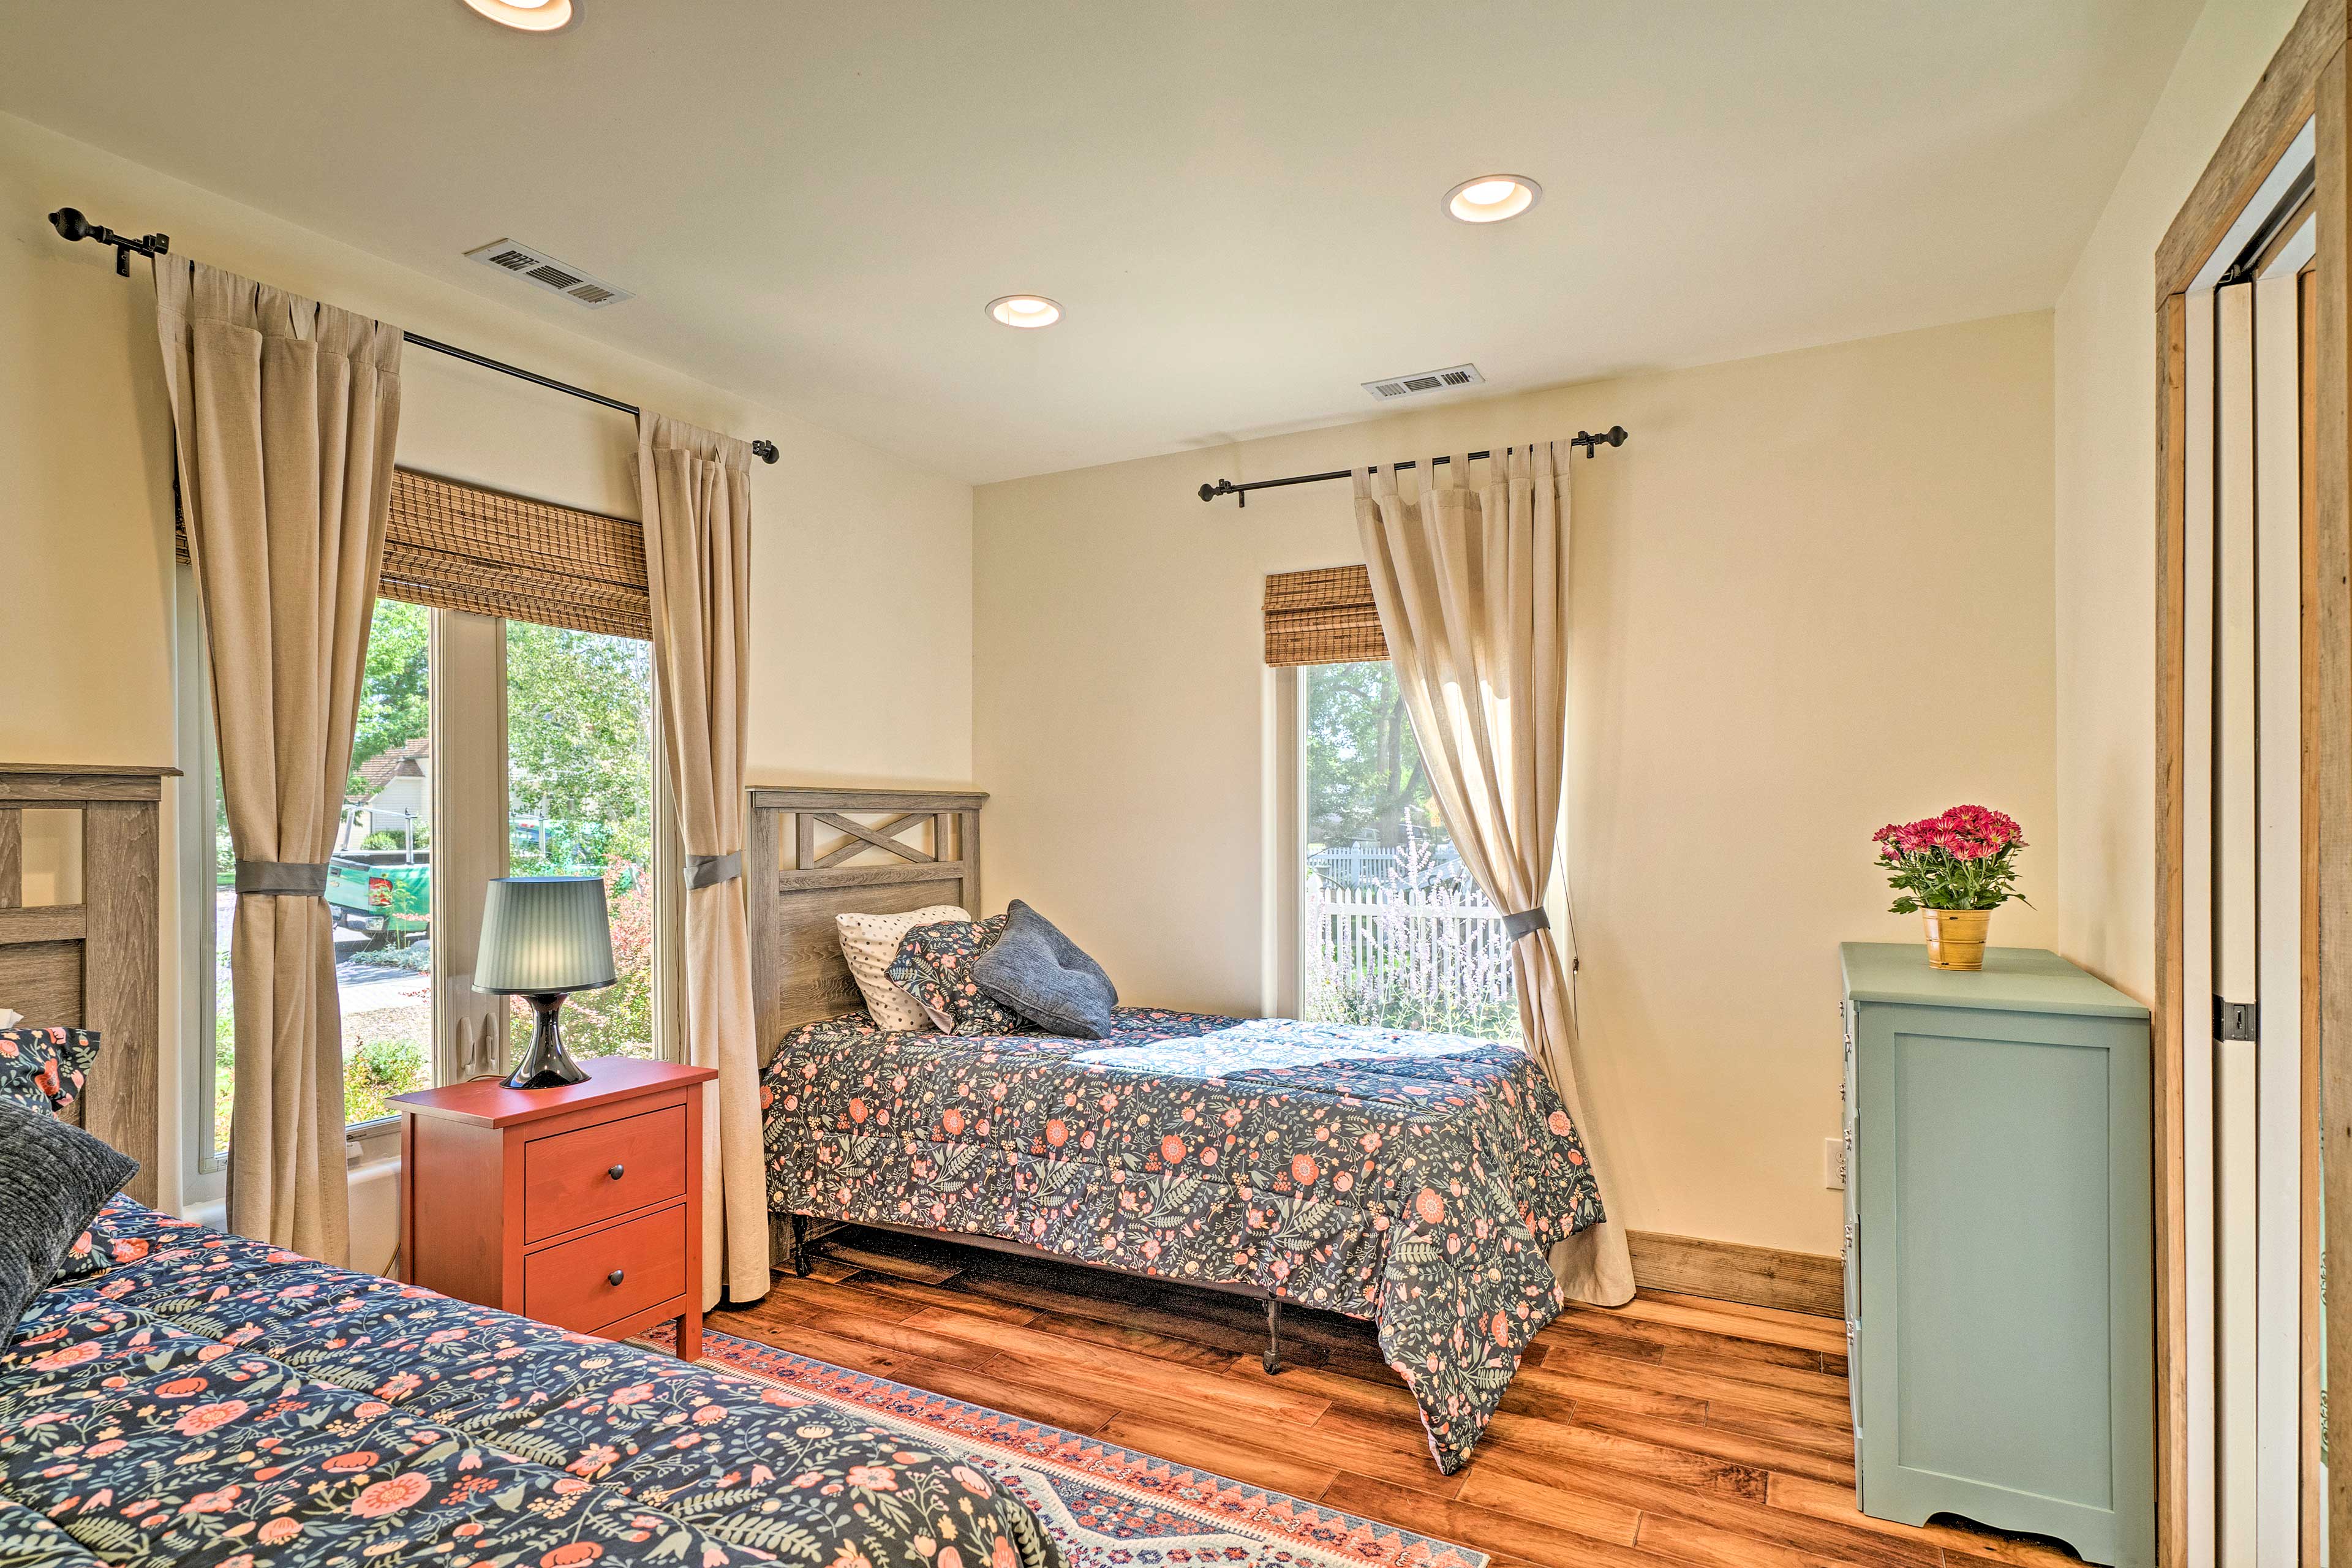 The property offers 2 well-appointed bedrooms.